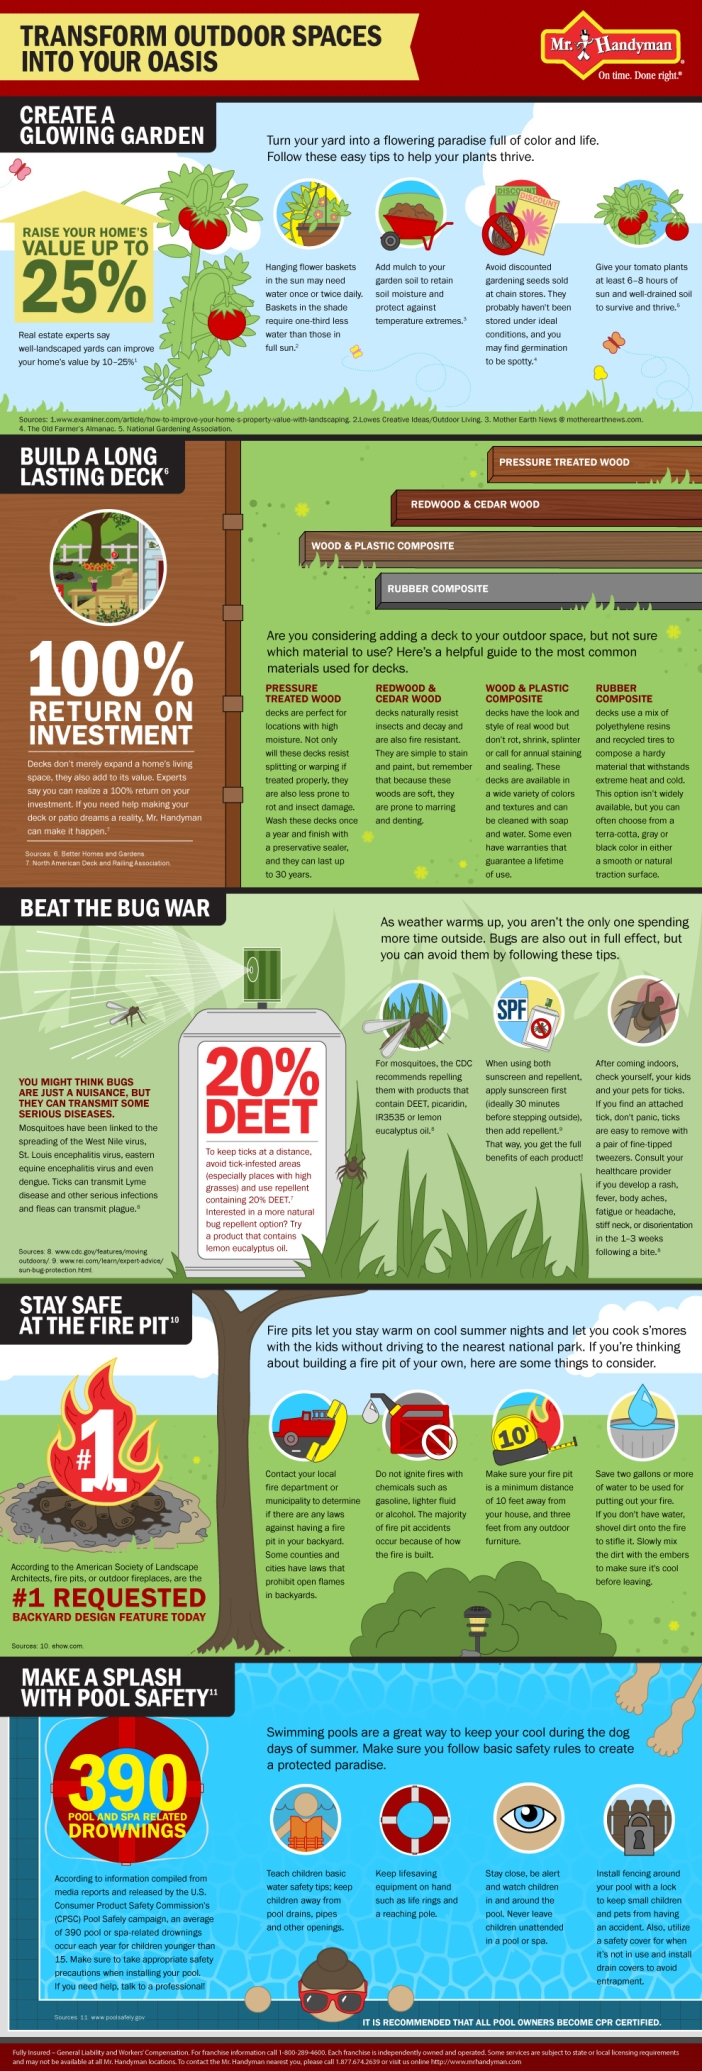 Transform Outdoor Spaces Into An Oasis - infographic